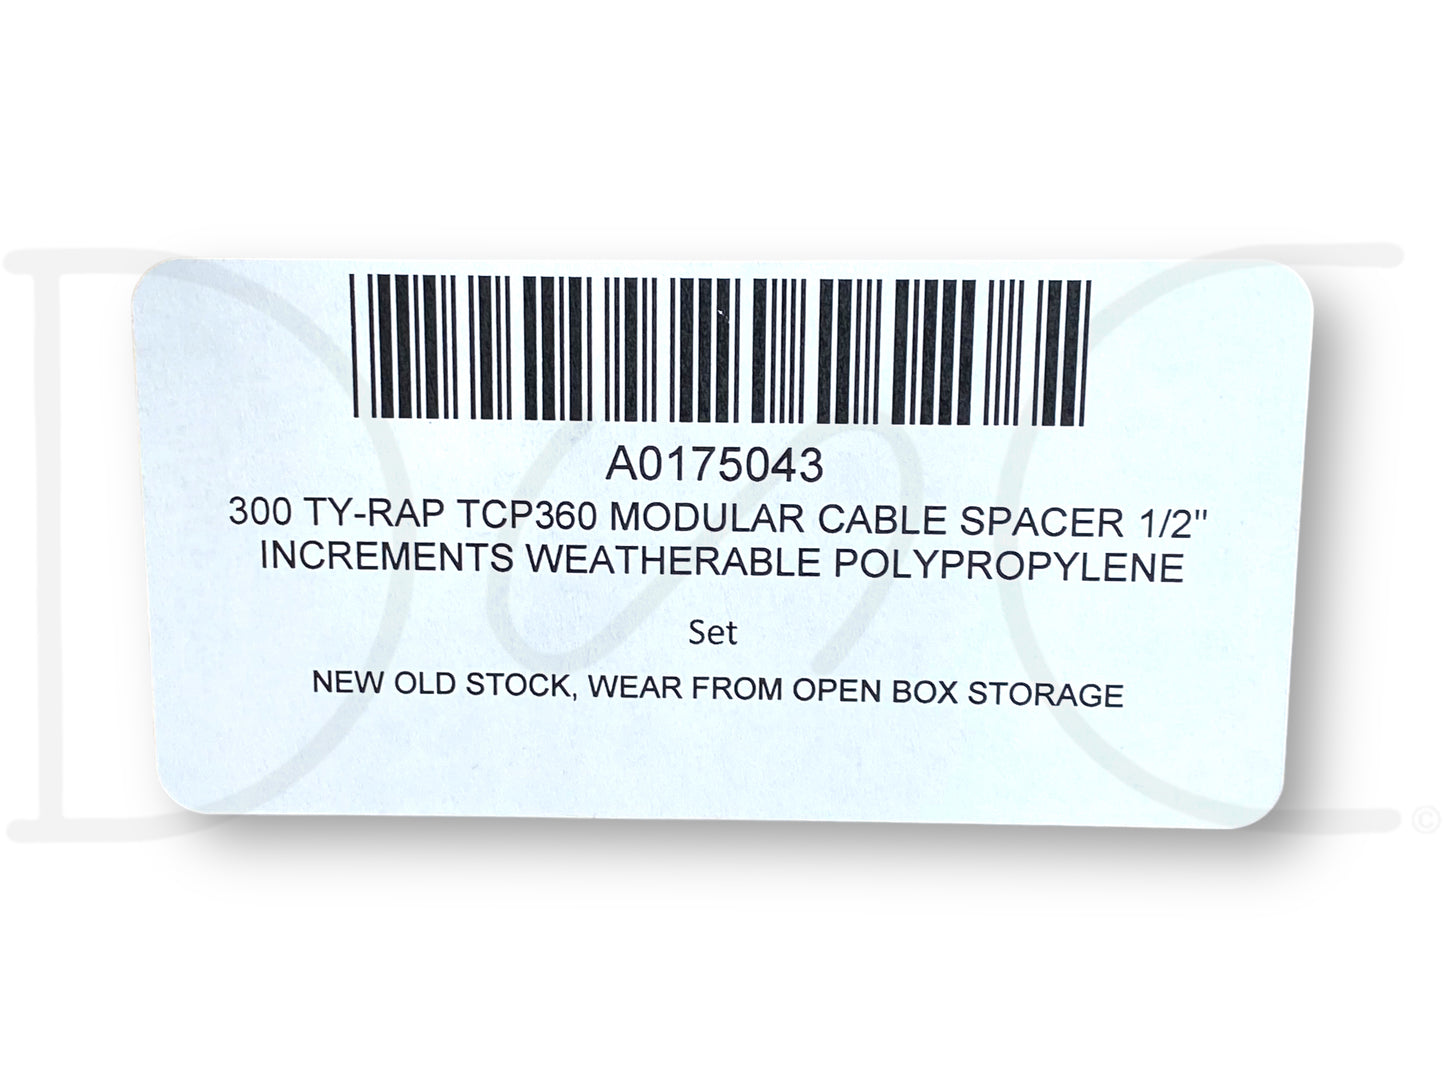 300 Ty-Rap Tcp360 Modular Cable Spacer 1/2" Increments Weatherable Polypropylene